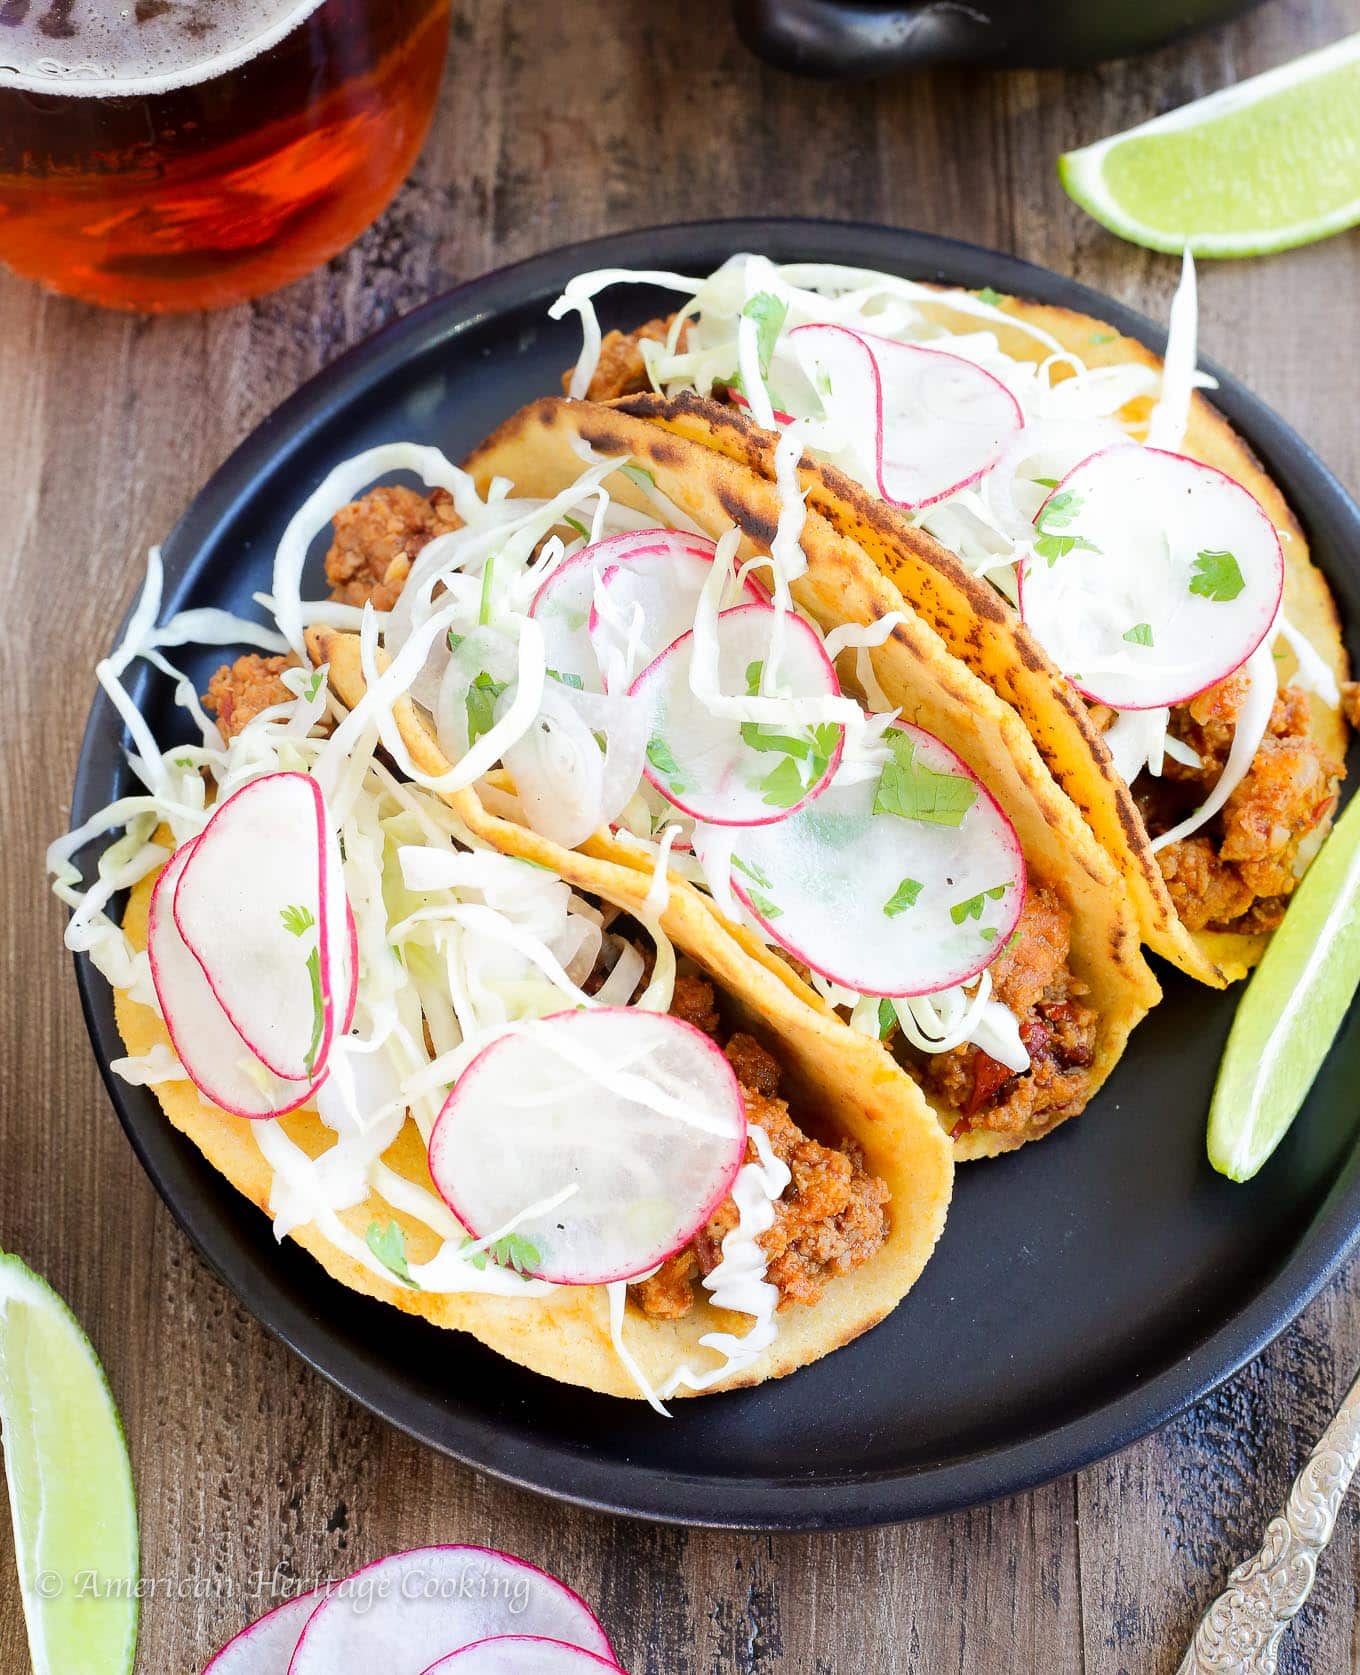 These Chipotle Chorizo Tacos are smoky, spicy and complex! The homemade sweet potato tortilla temper the spice with a little bit of sweetness and a mezcal lime slaw brightens the flavors and pulls the whole taco together! 